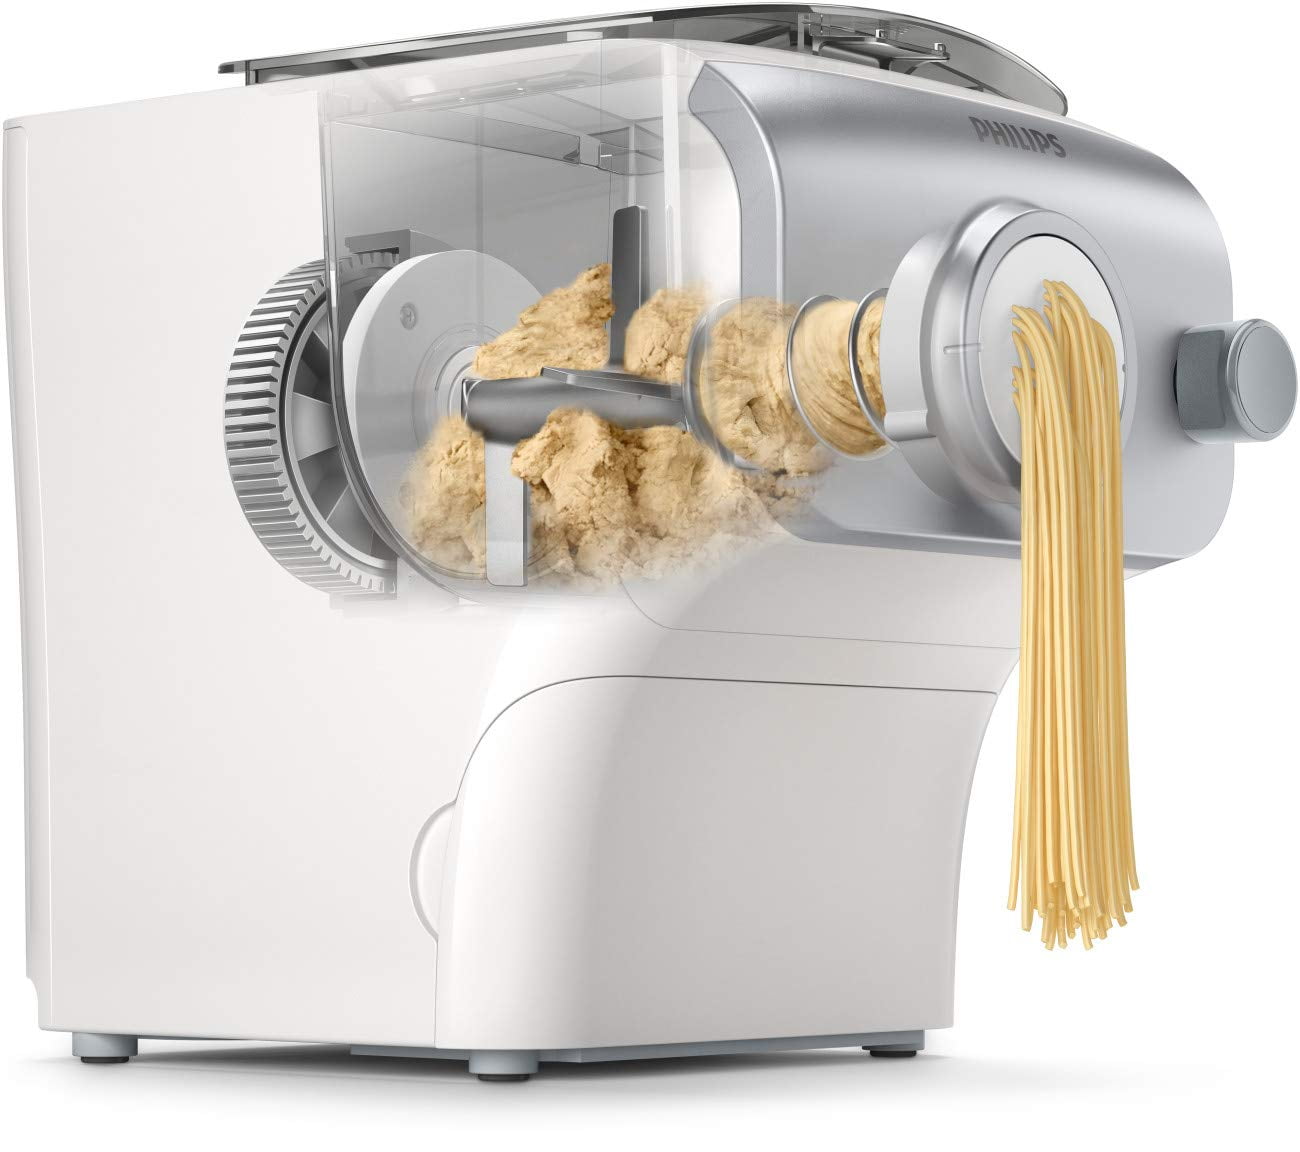 Philips Pasta Maker Attachments – Grow It, Catch It, Cook It